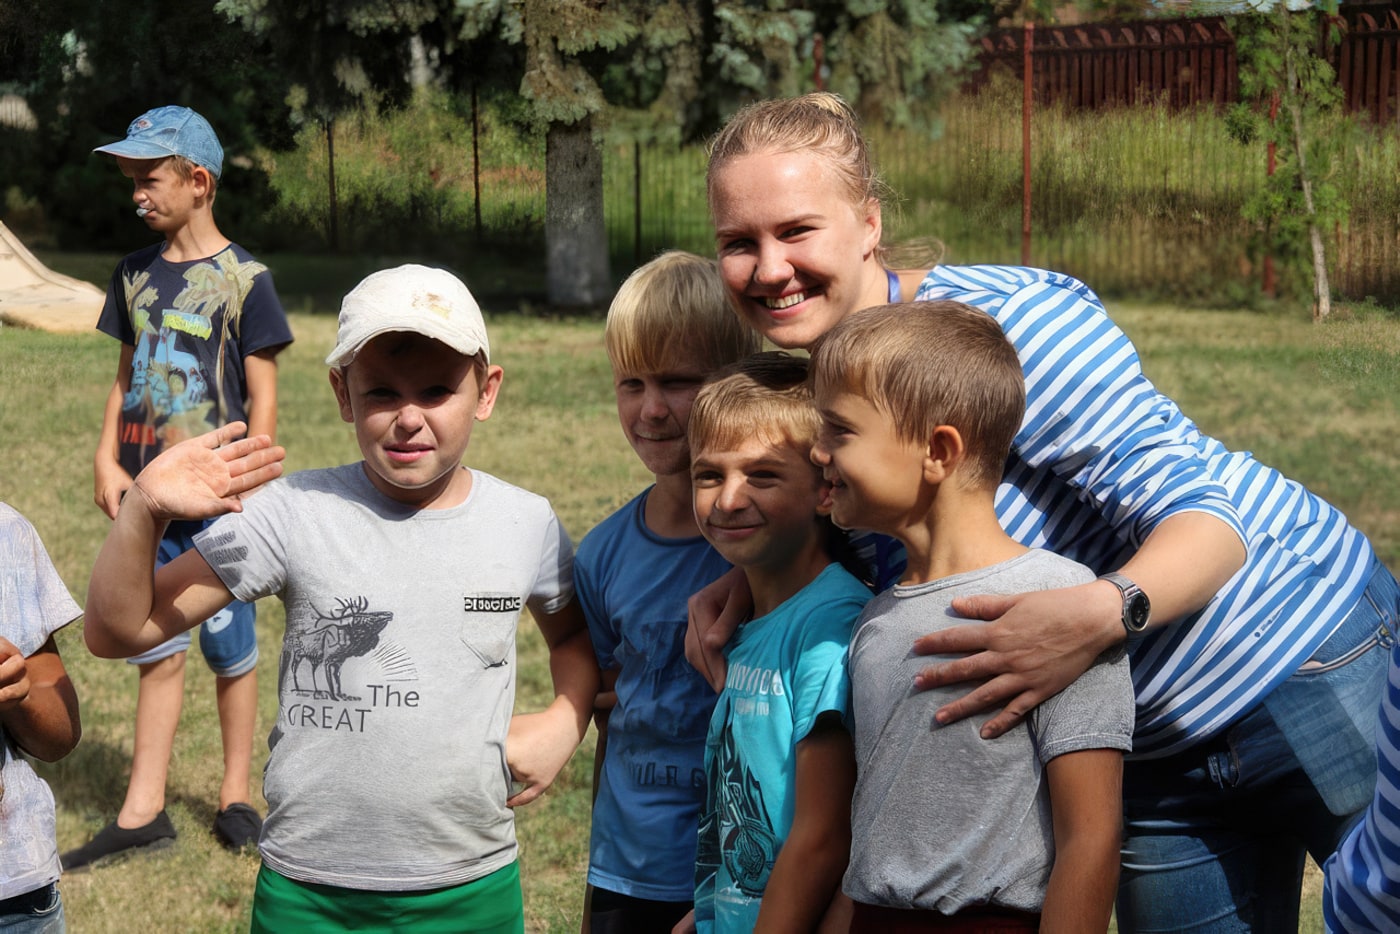 The Ukraine war and growing desperation in hard times are driving a surge in the number of children expected to flock to Bible camps.